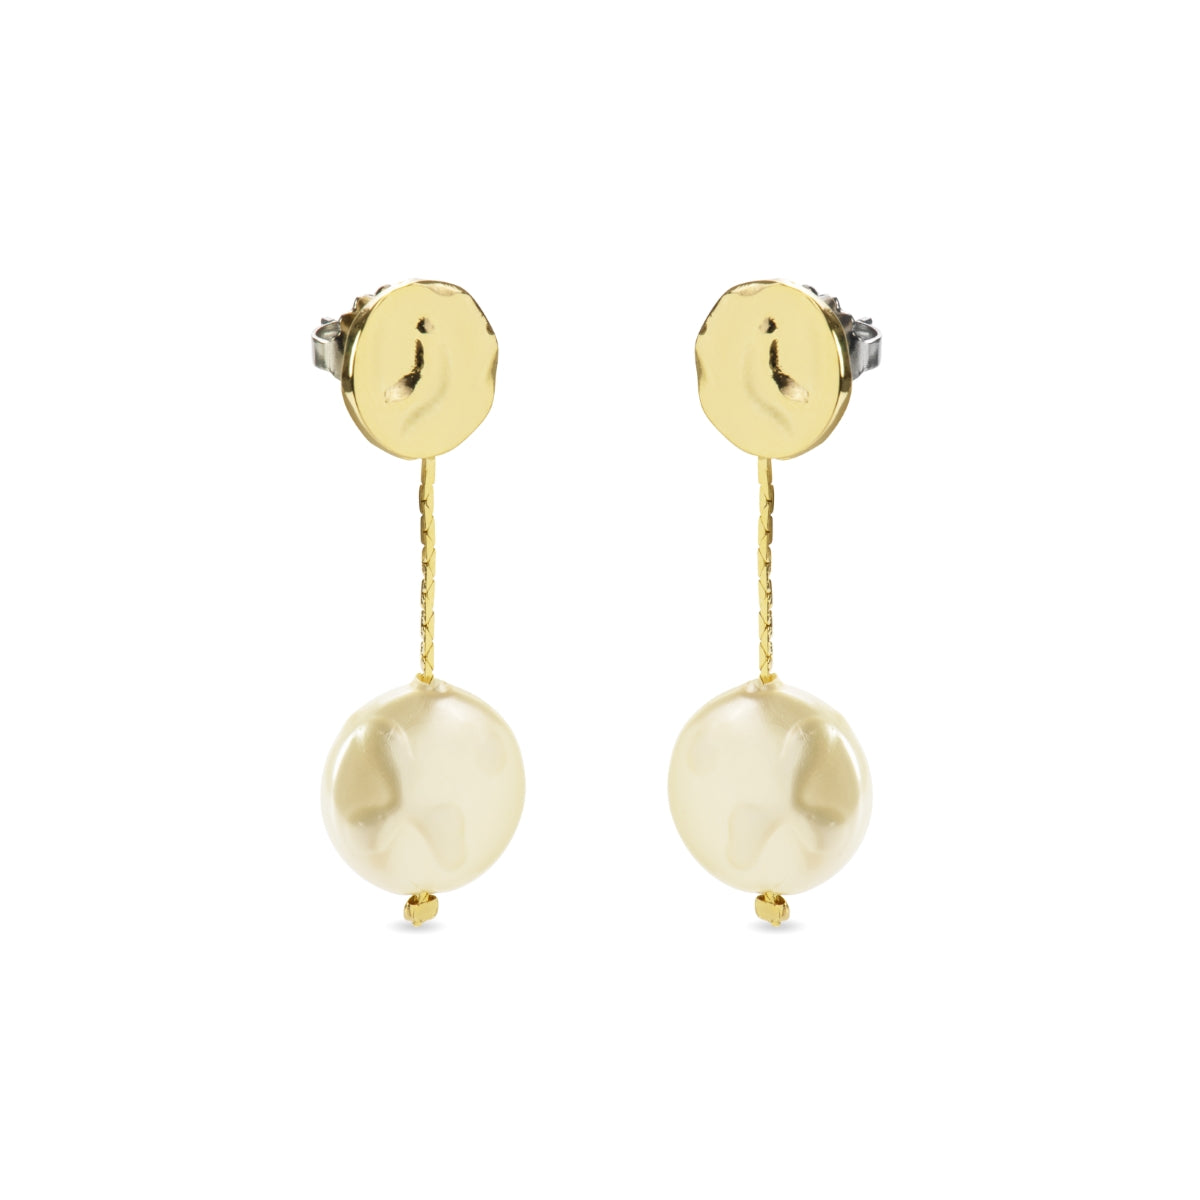 Vidthas Earrings finished in 18 Kt Yellow Gold